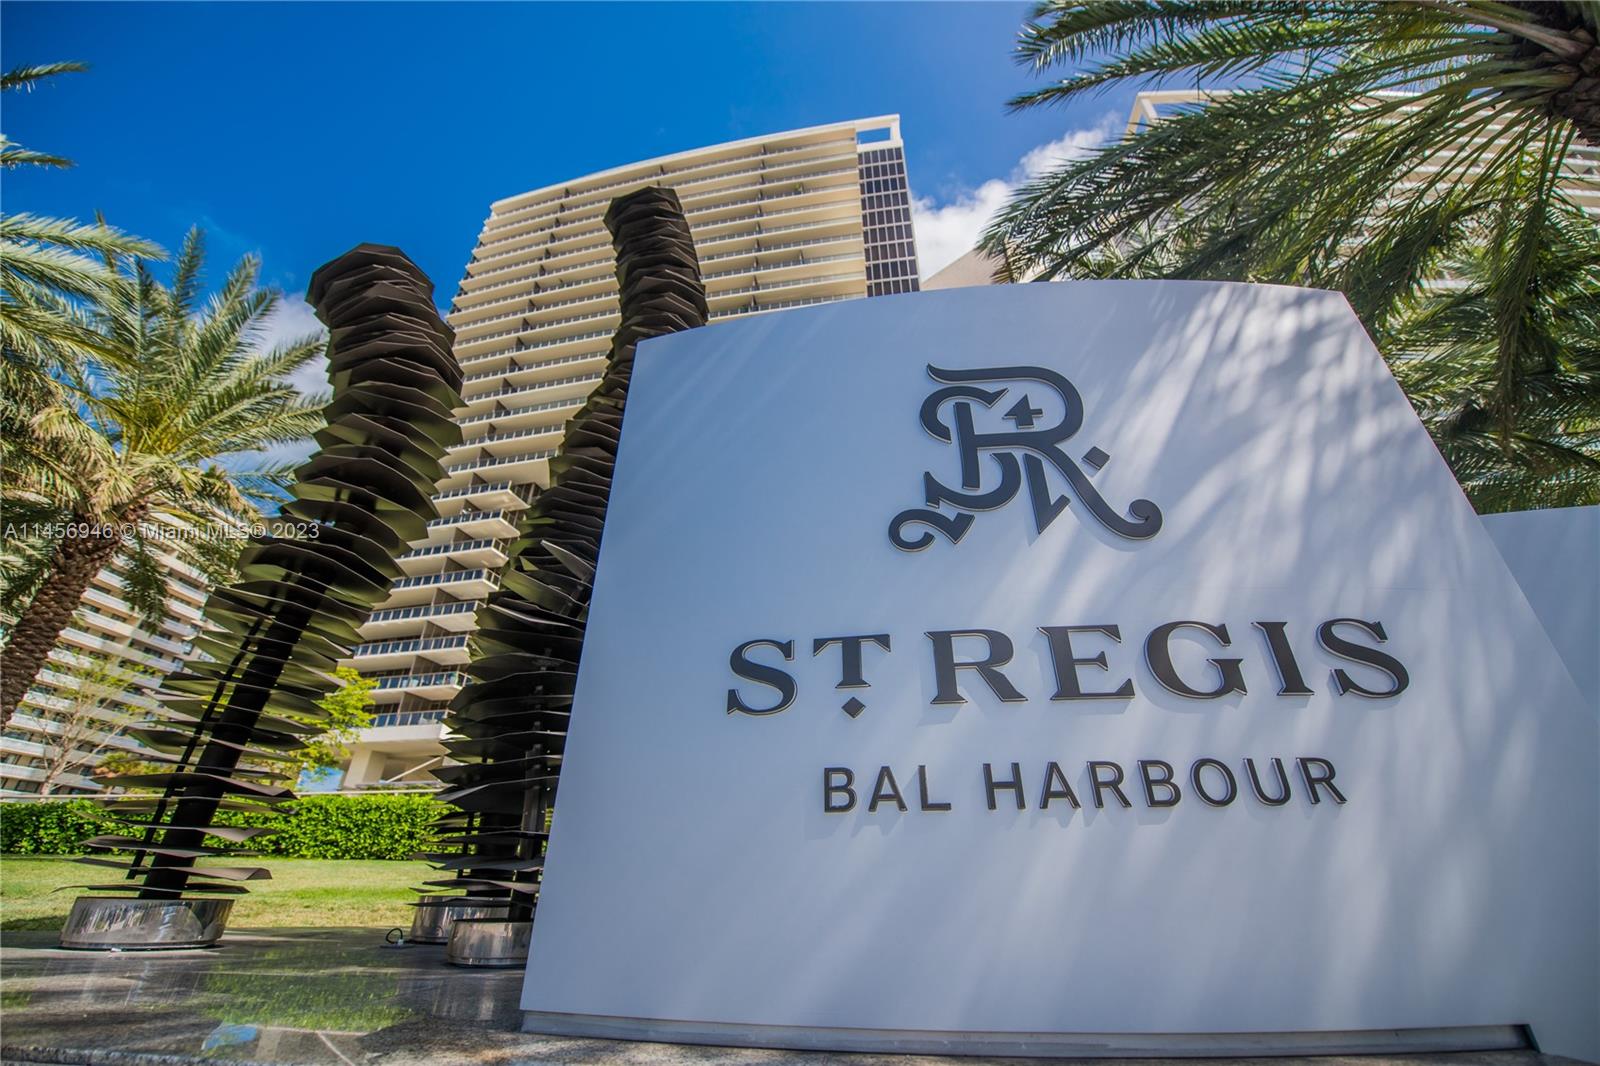 This exquisite 1bed 2 bath residence, fully renovated and designed to perfection at the St. Regis Hotel Bal Harbour!! Its offers two extra-deep terraces, with spectacular ocean views to the north east from every room. Luxuriously appointed, the home includes a decadent master bedroom suite with walk-in closet and oversized bathroom.  Entertain in the flexible living area, where a second full bath is ideal for guest use. The entire residence is replete with fine woods,  and superlative details throughout. The home is located on a high floor of the St. Regis Bal Harbour, where the many amenities of the property are at your fingertips, including three pools, a Remede spa, butler service, and the St. Regis’ spectacular serviced beach.